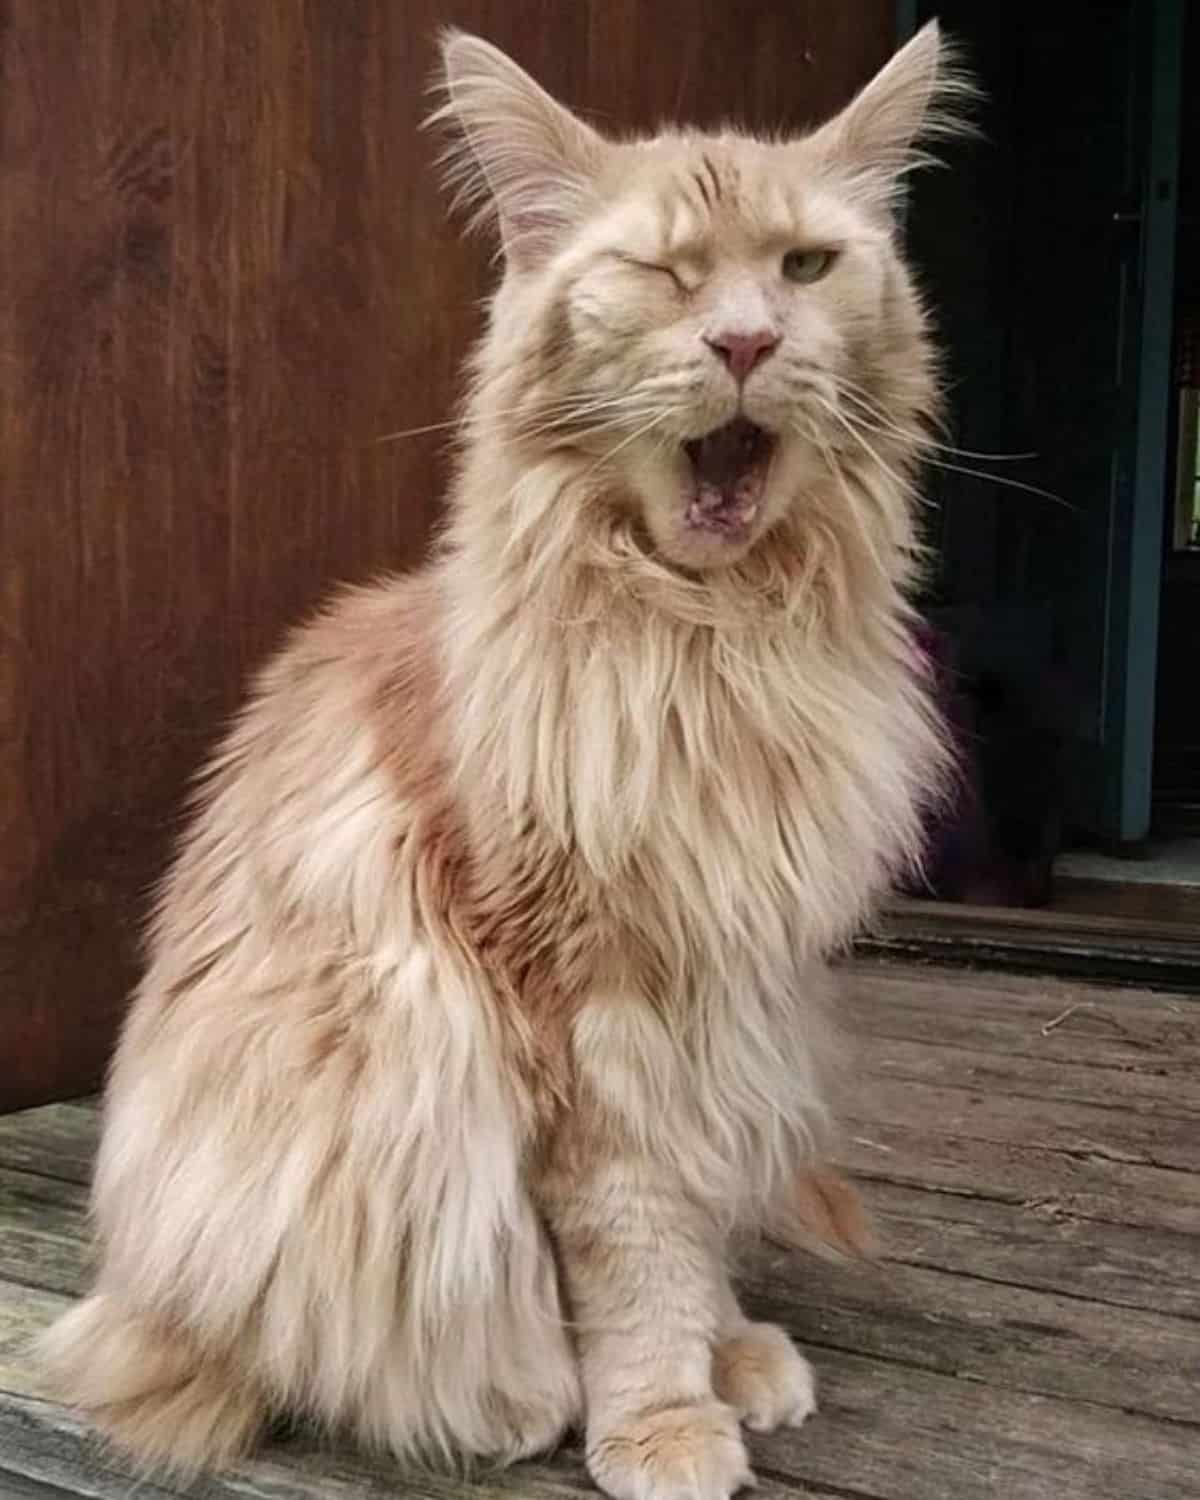 A yawming fluffy maine coon sitting on a wooden porch.